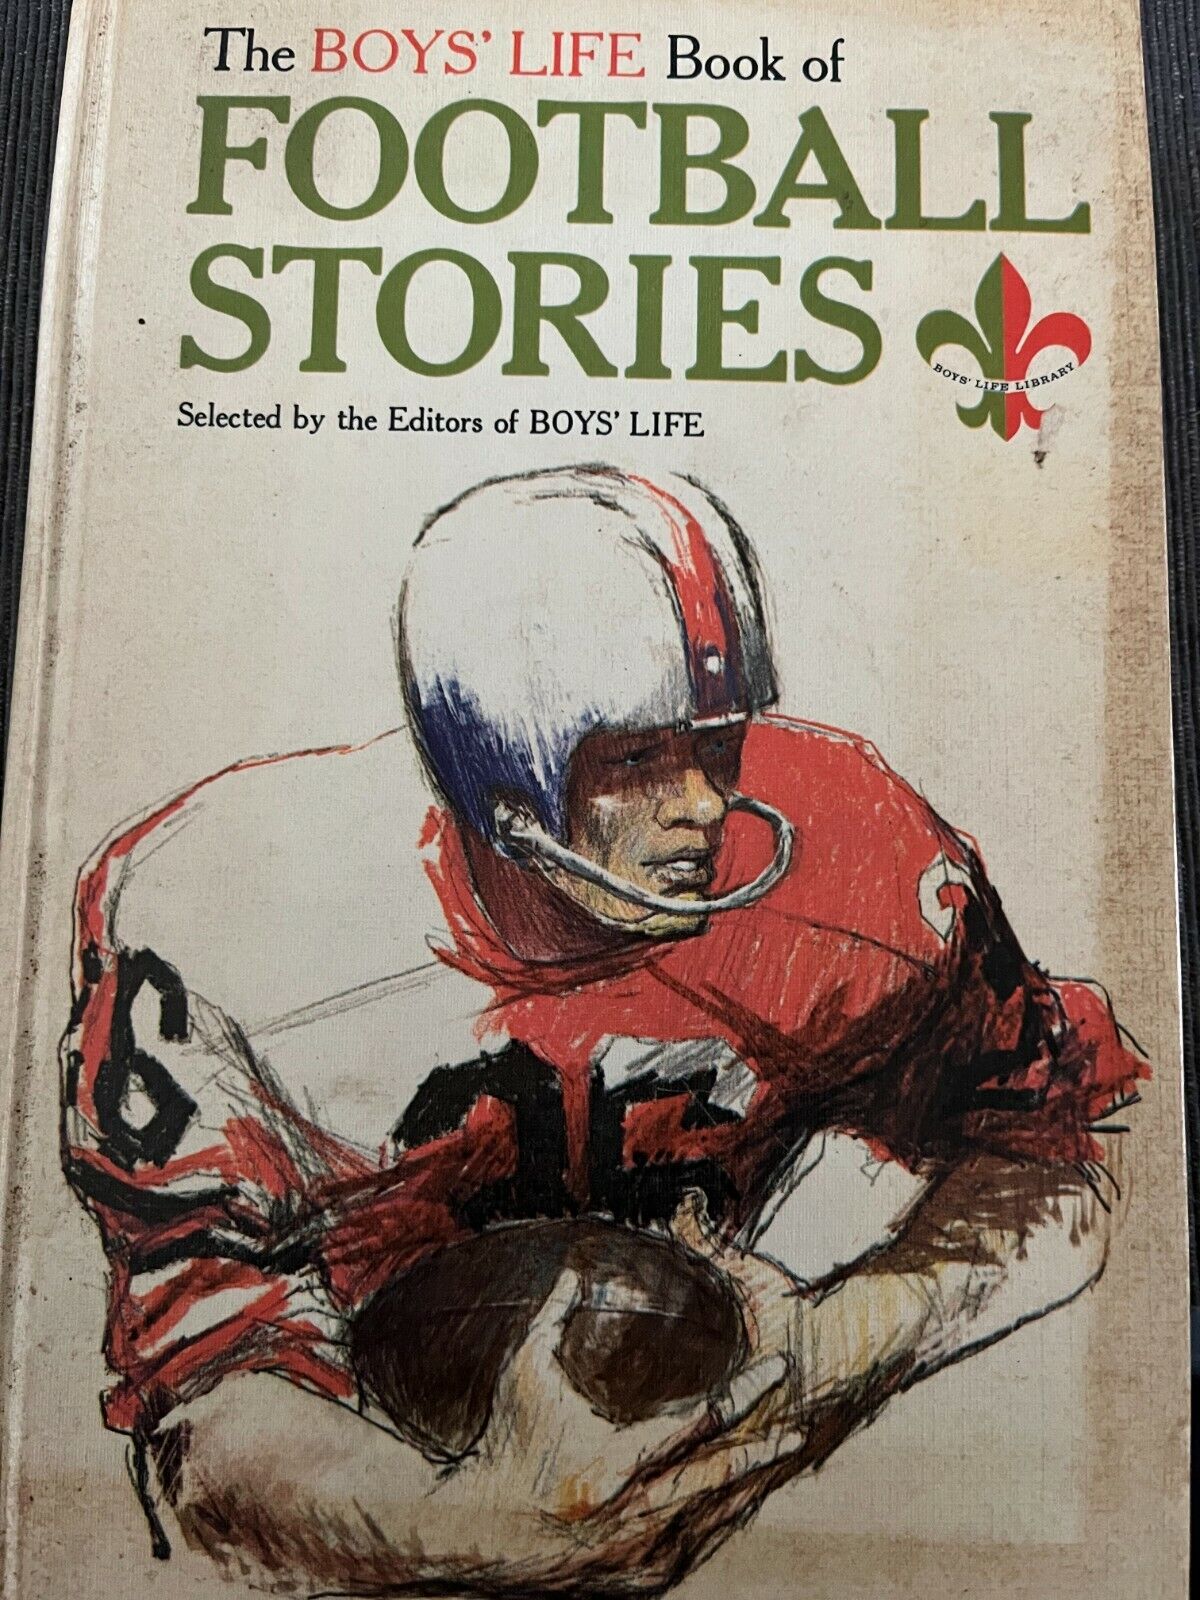 Boys' Life book of FOOTBALL STORIES  1963 Boy Scouts of America